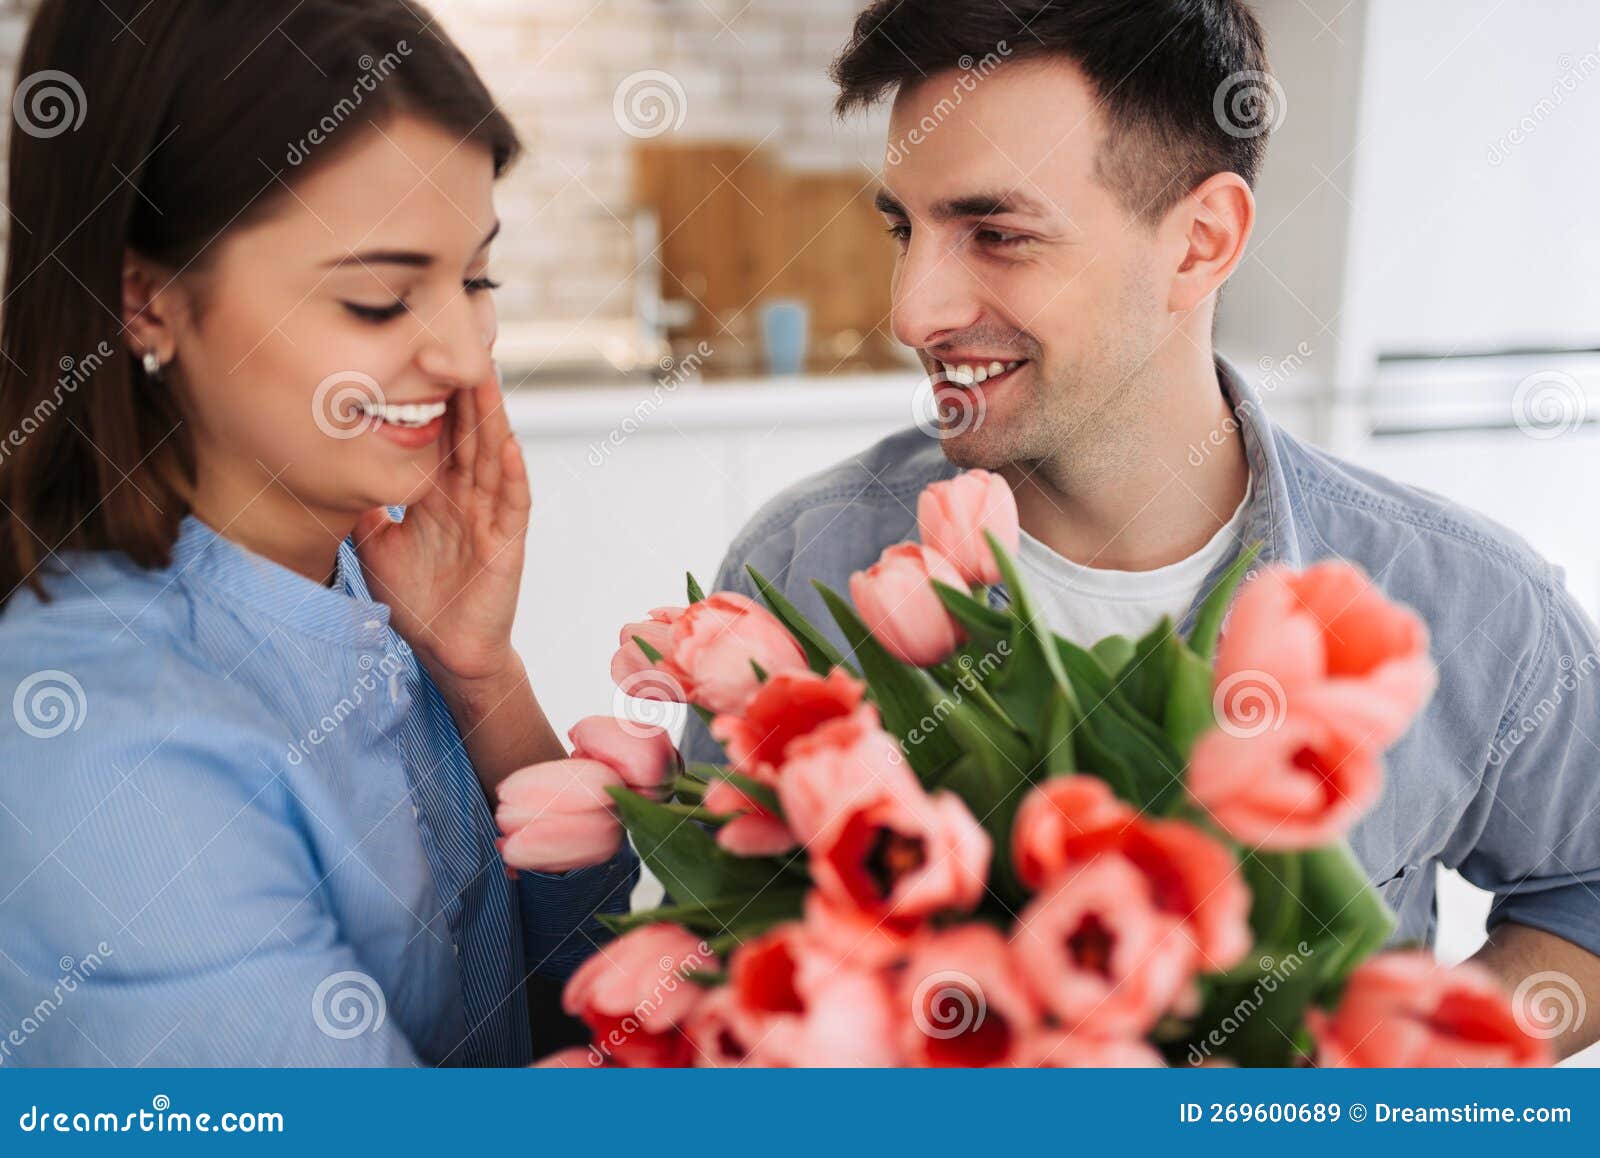 picture showing man giving flowers to a woman at home. romantic concept. woman`s day